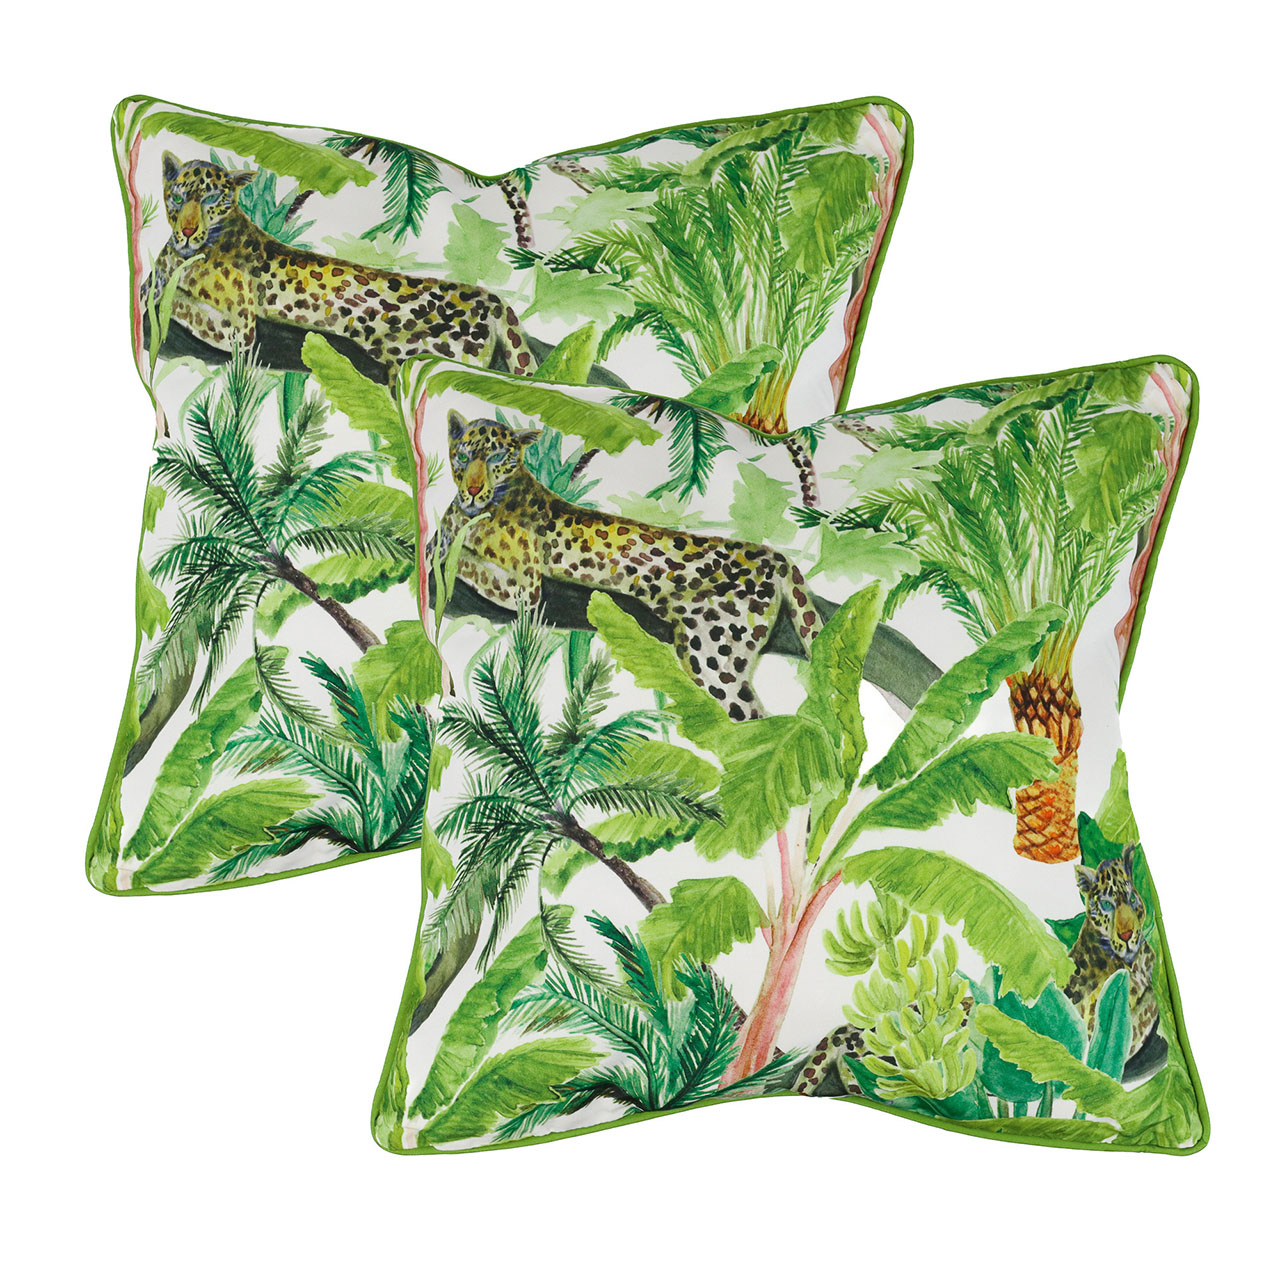 Water Resistant Garden Scatter Cushions - Pack of 2